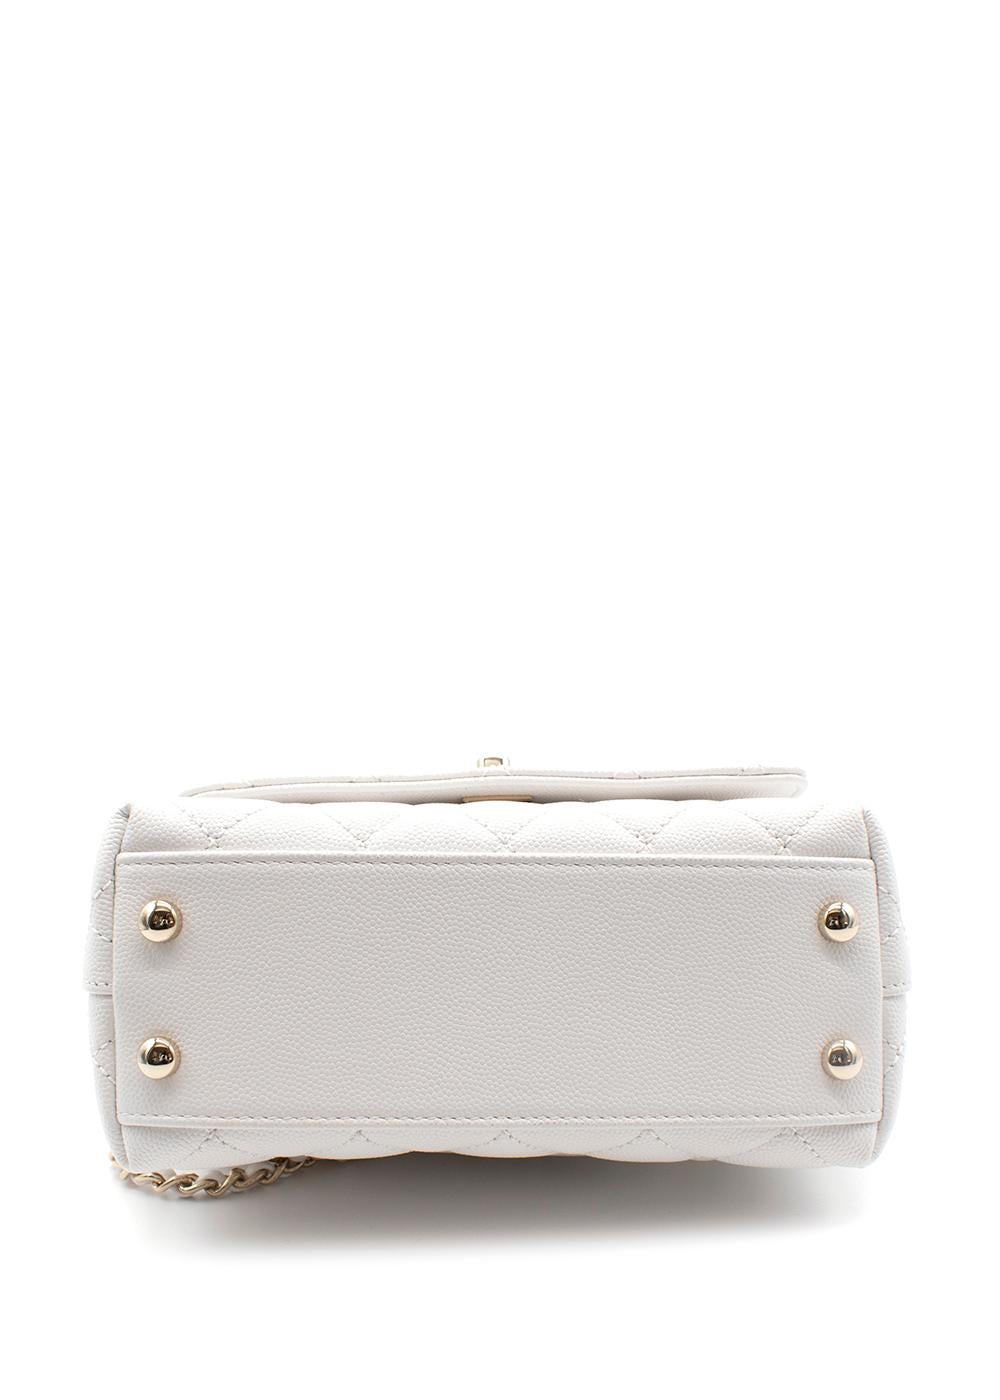 White Caviar Leather Mini Coco Top Handle Flap Bag For Sale 6